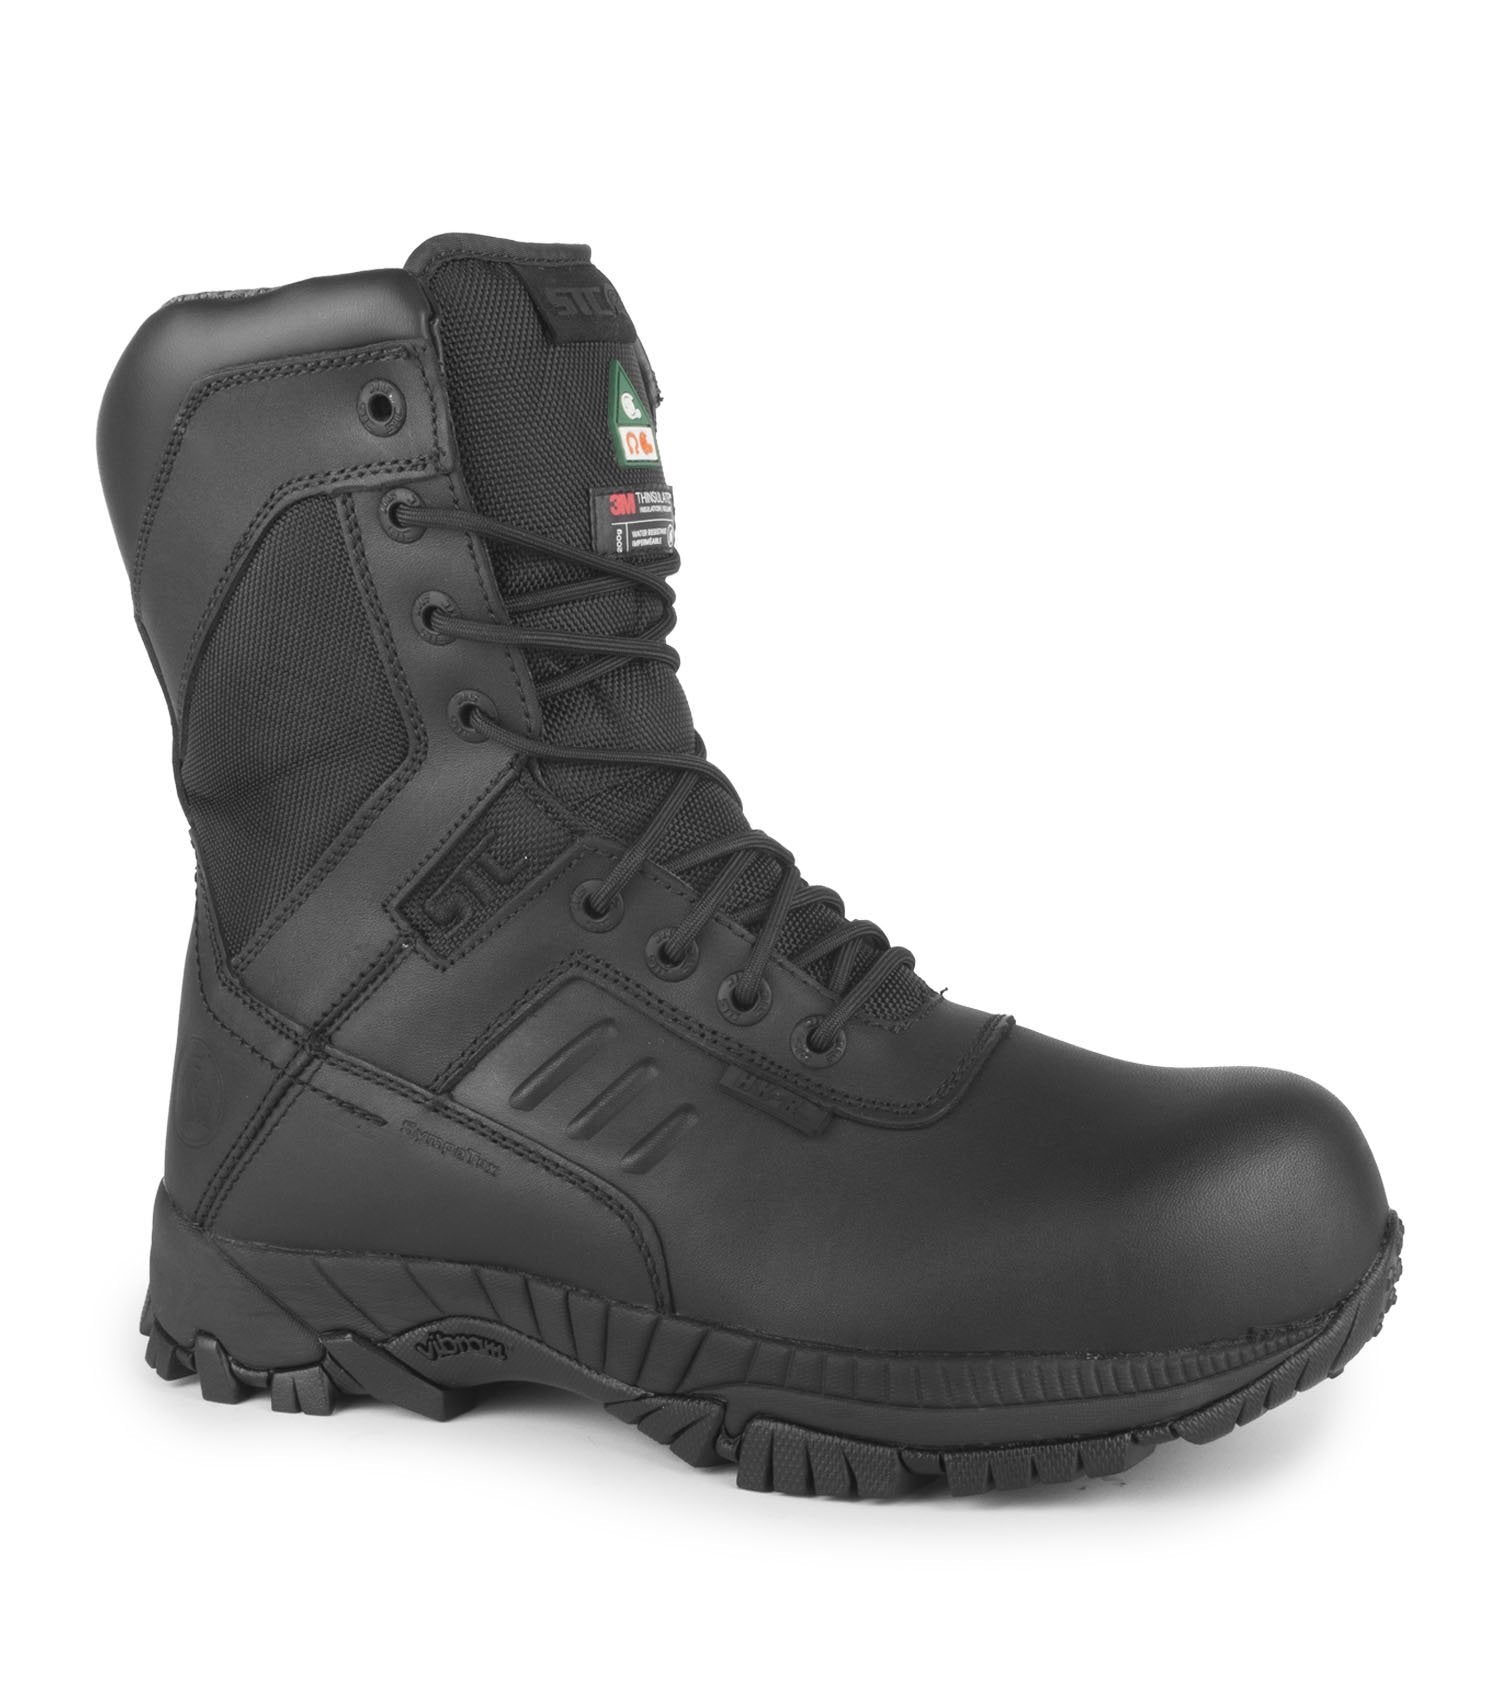 STC Tactik 8" Tactical Side-Zip Safety Boot | Black | Sizes 7 - 14 Work Boots - Cleanflow